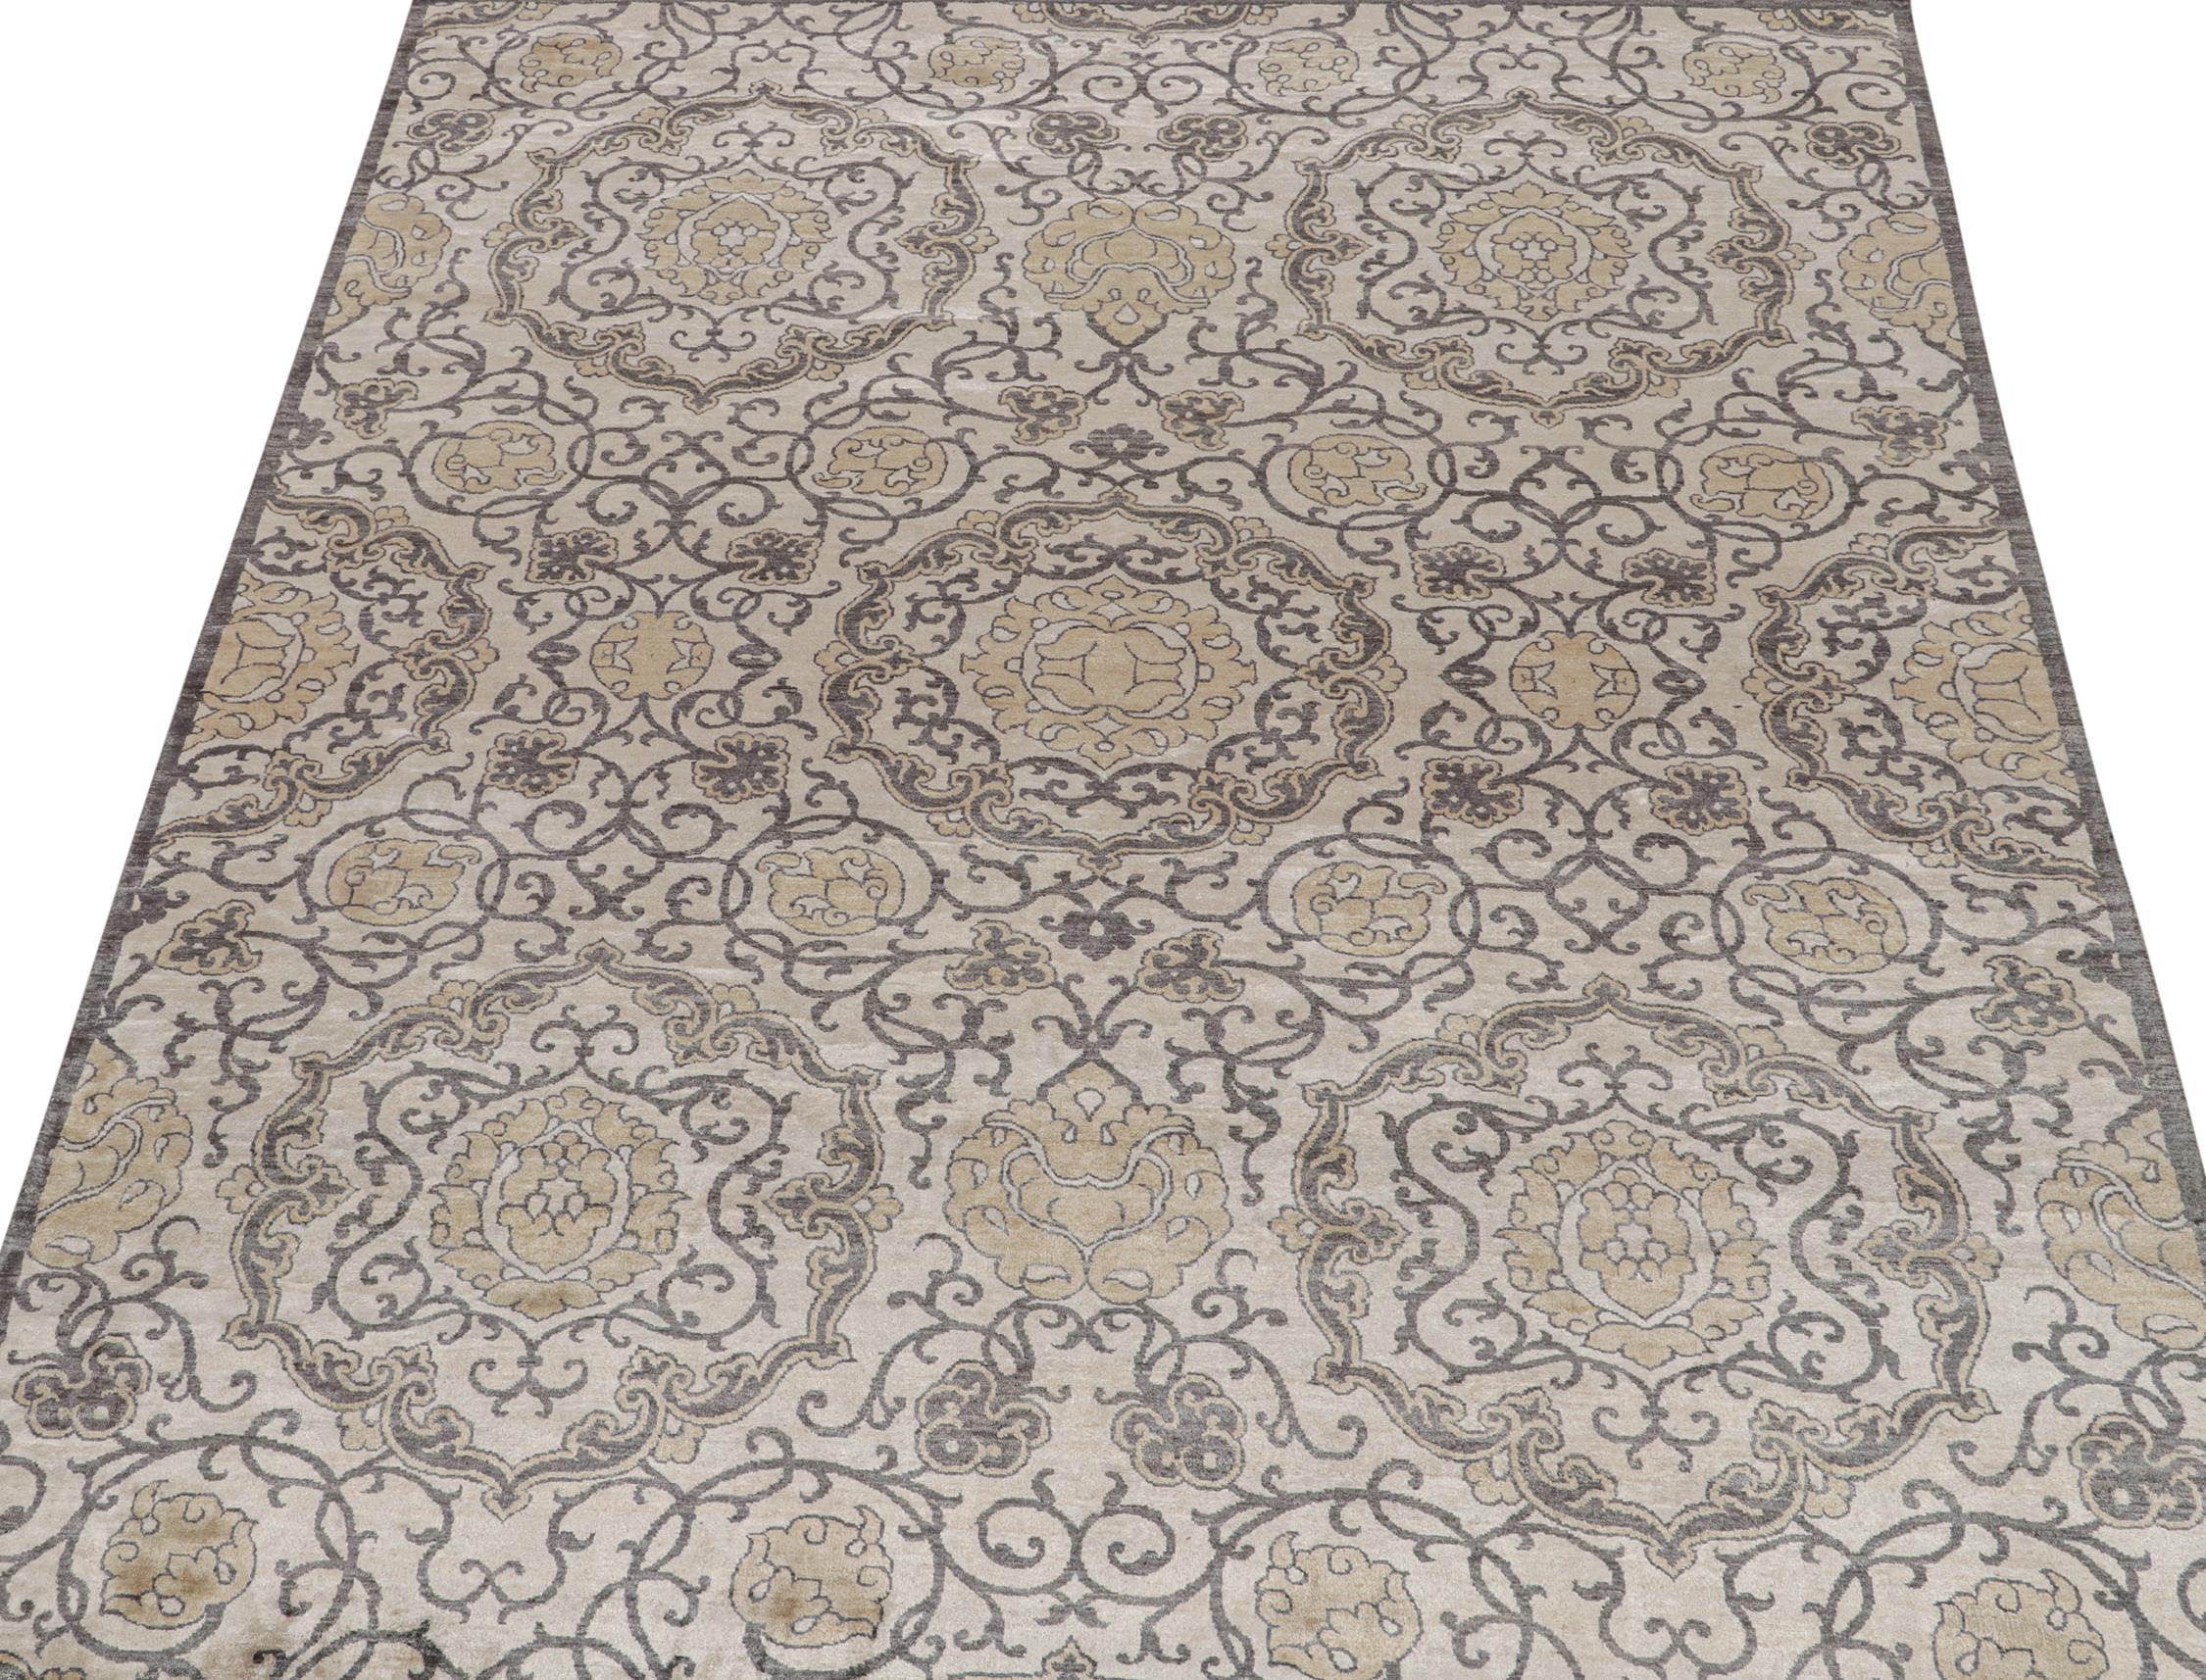 An 8x10 rug inspired from traditional rug styles, from Rug & Kilim’s Modern Classics Collection. Hand knotted in wool, playing a confluence of gray, beige-brown and gold floral medallions with classic grace.
Further on the design:
Connoisseurs